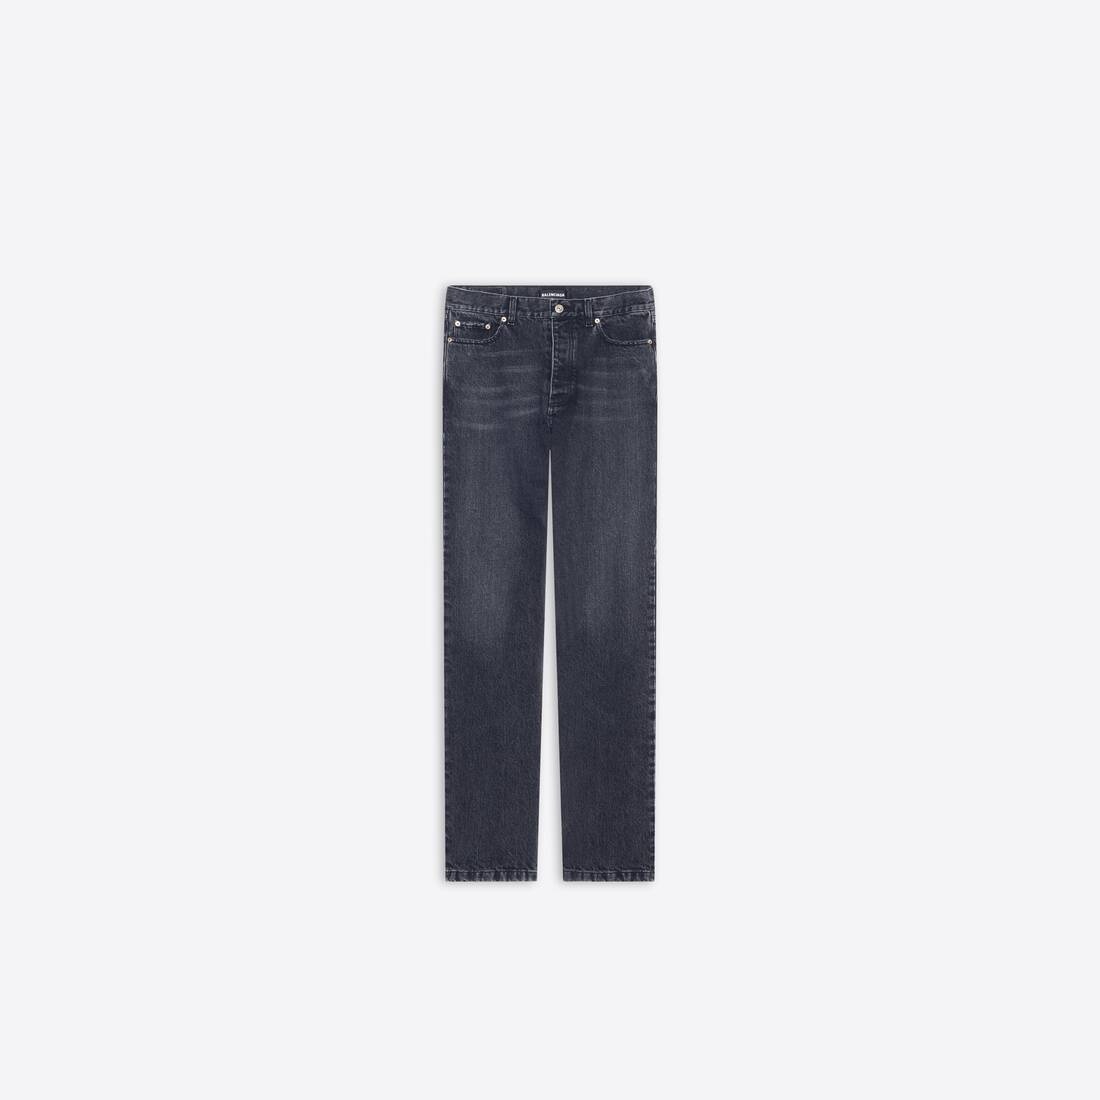 Men's Year Of The Tiger Normal Fit Pants in Black - 4